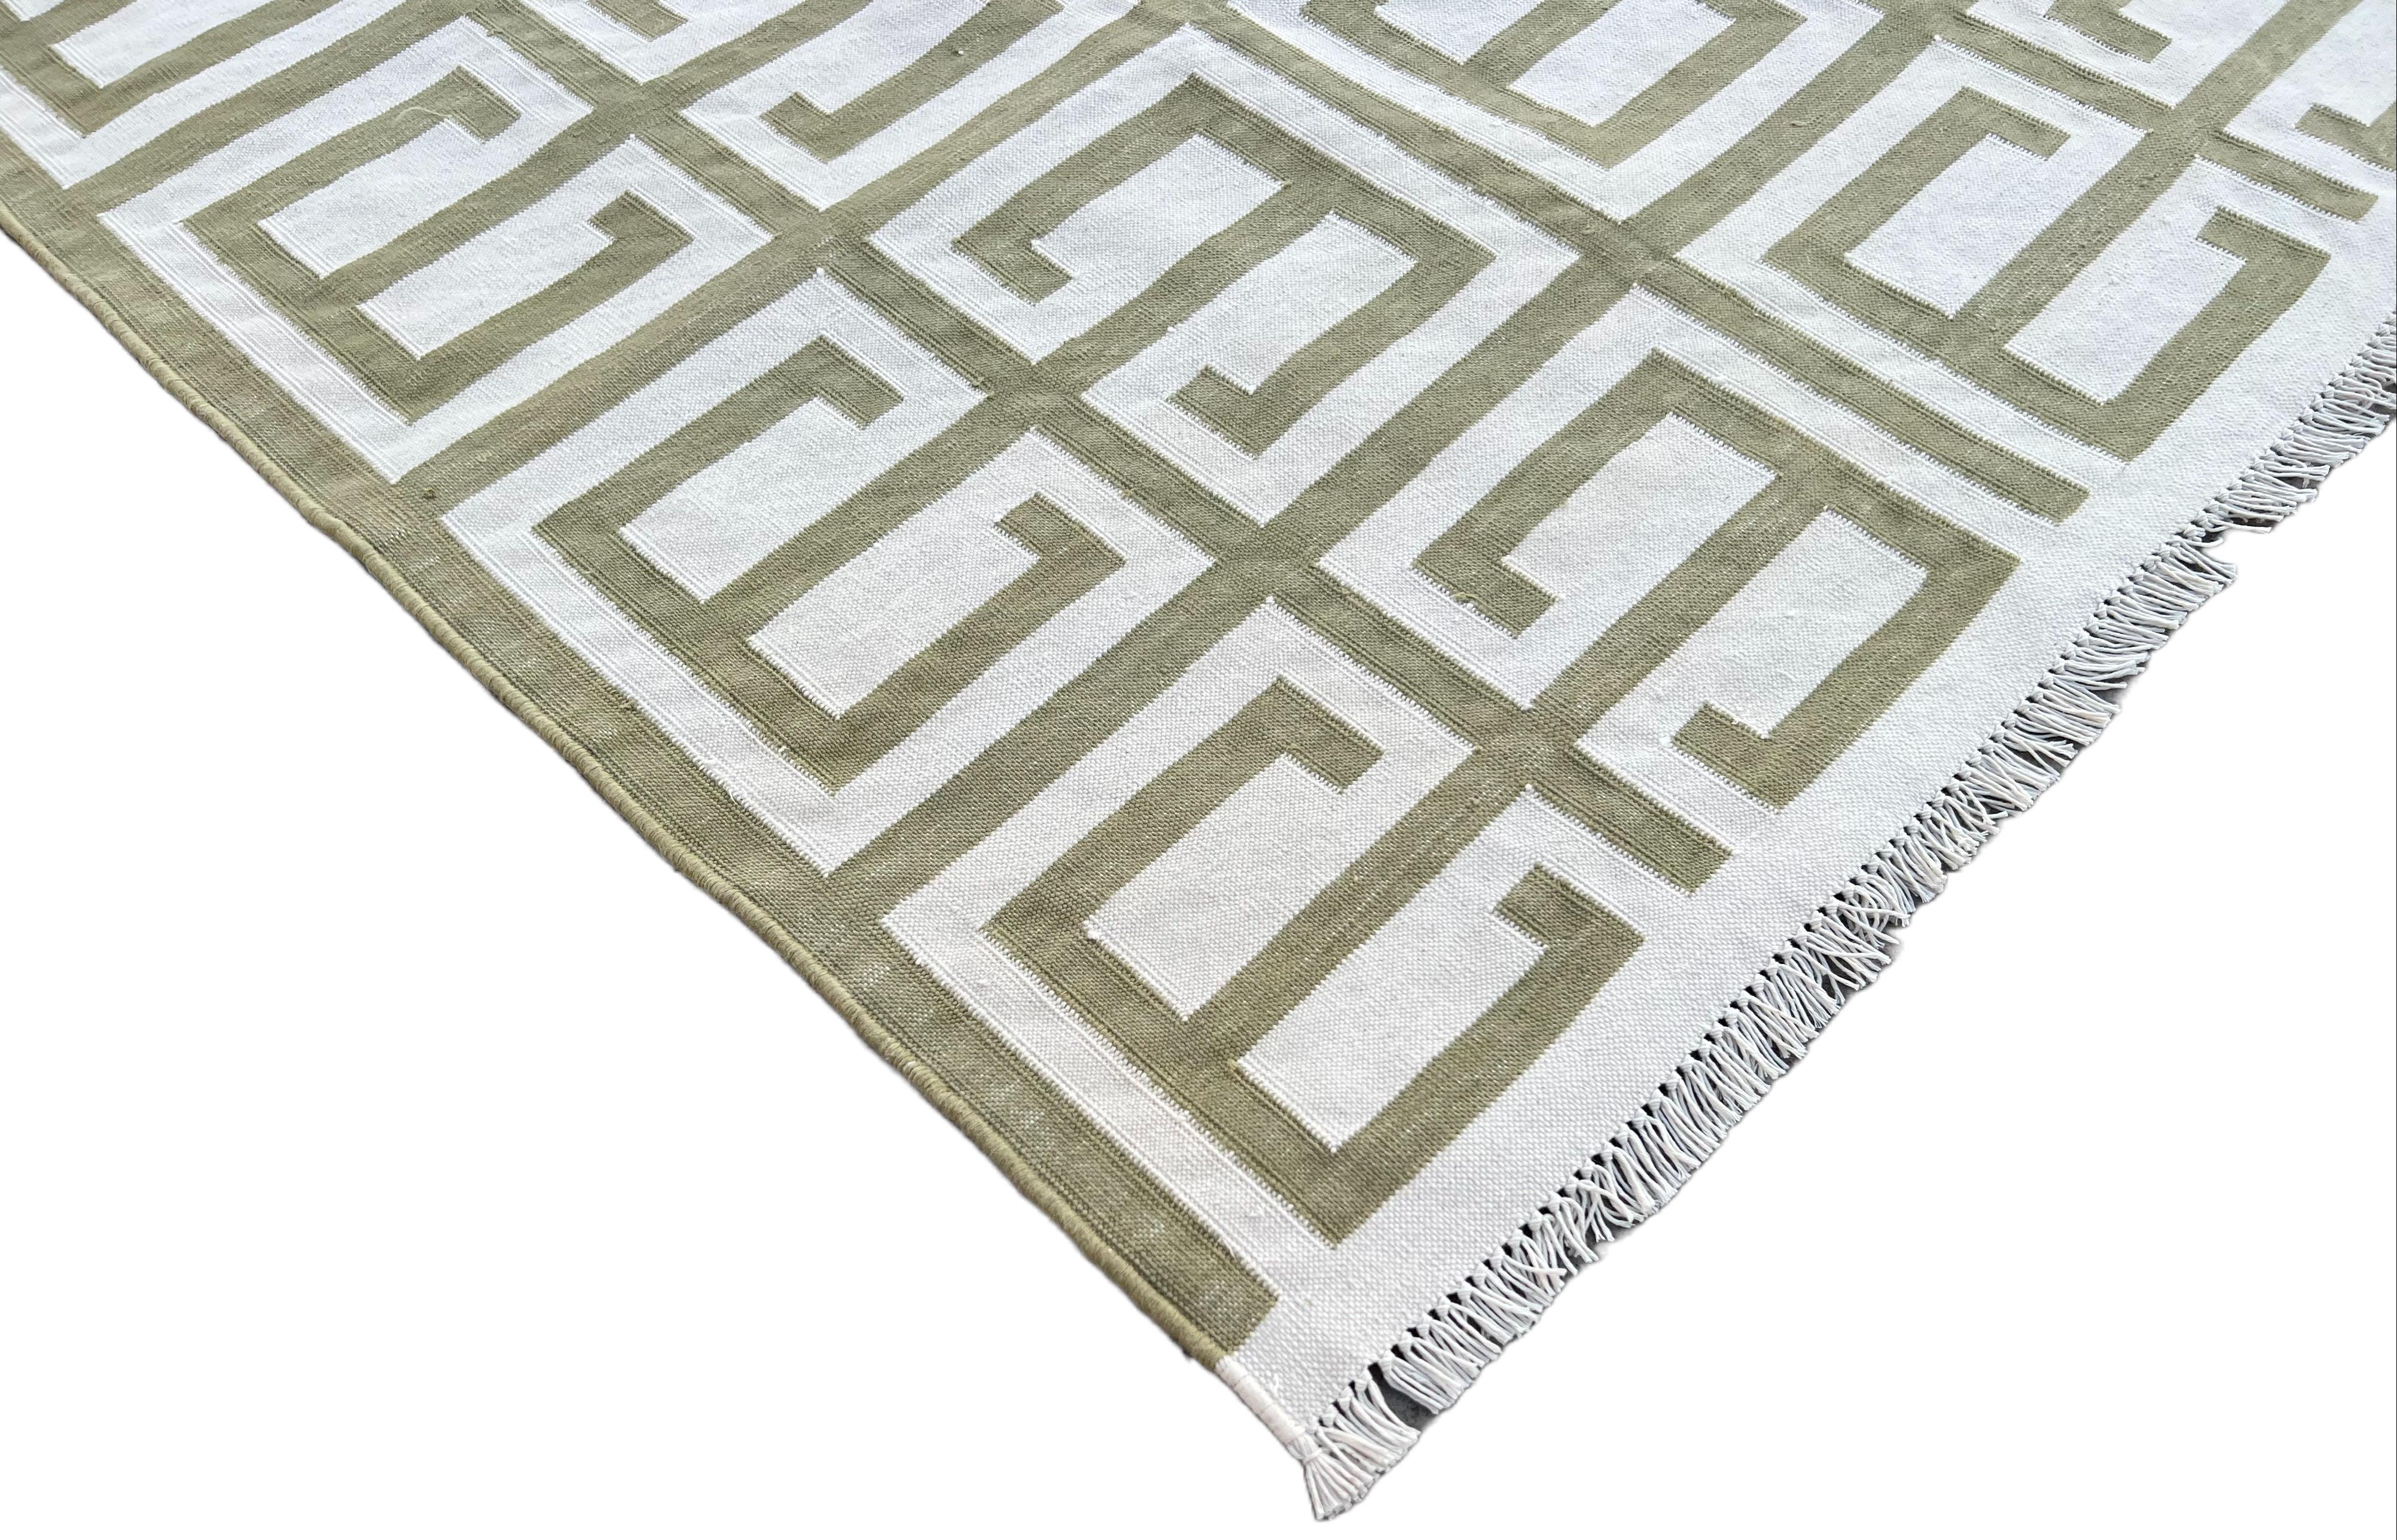 Cotton Natural Vegetable Dyed, Olive Green And White Geometric Indian Dhurrie Runner-3x12 feet (90x360cm)
These special flat-weave dhurries are hand-woven with 15 ply 100% cotton yarn. Due to the special manufacturing techniques used to create our